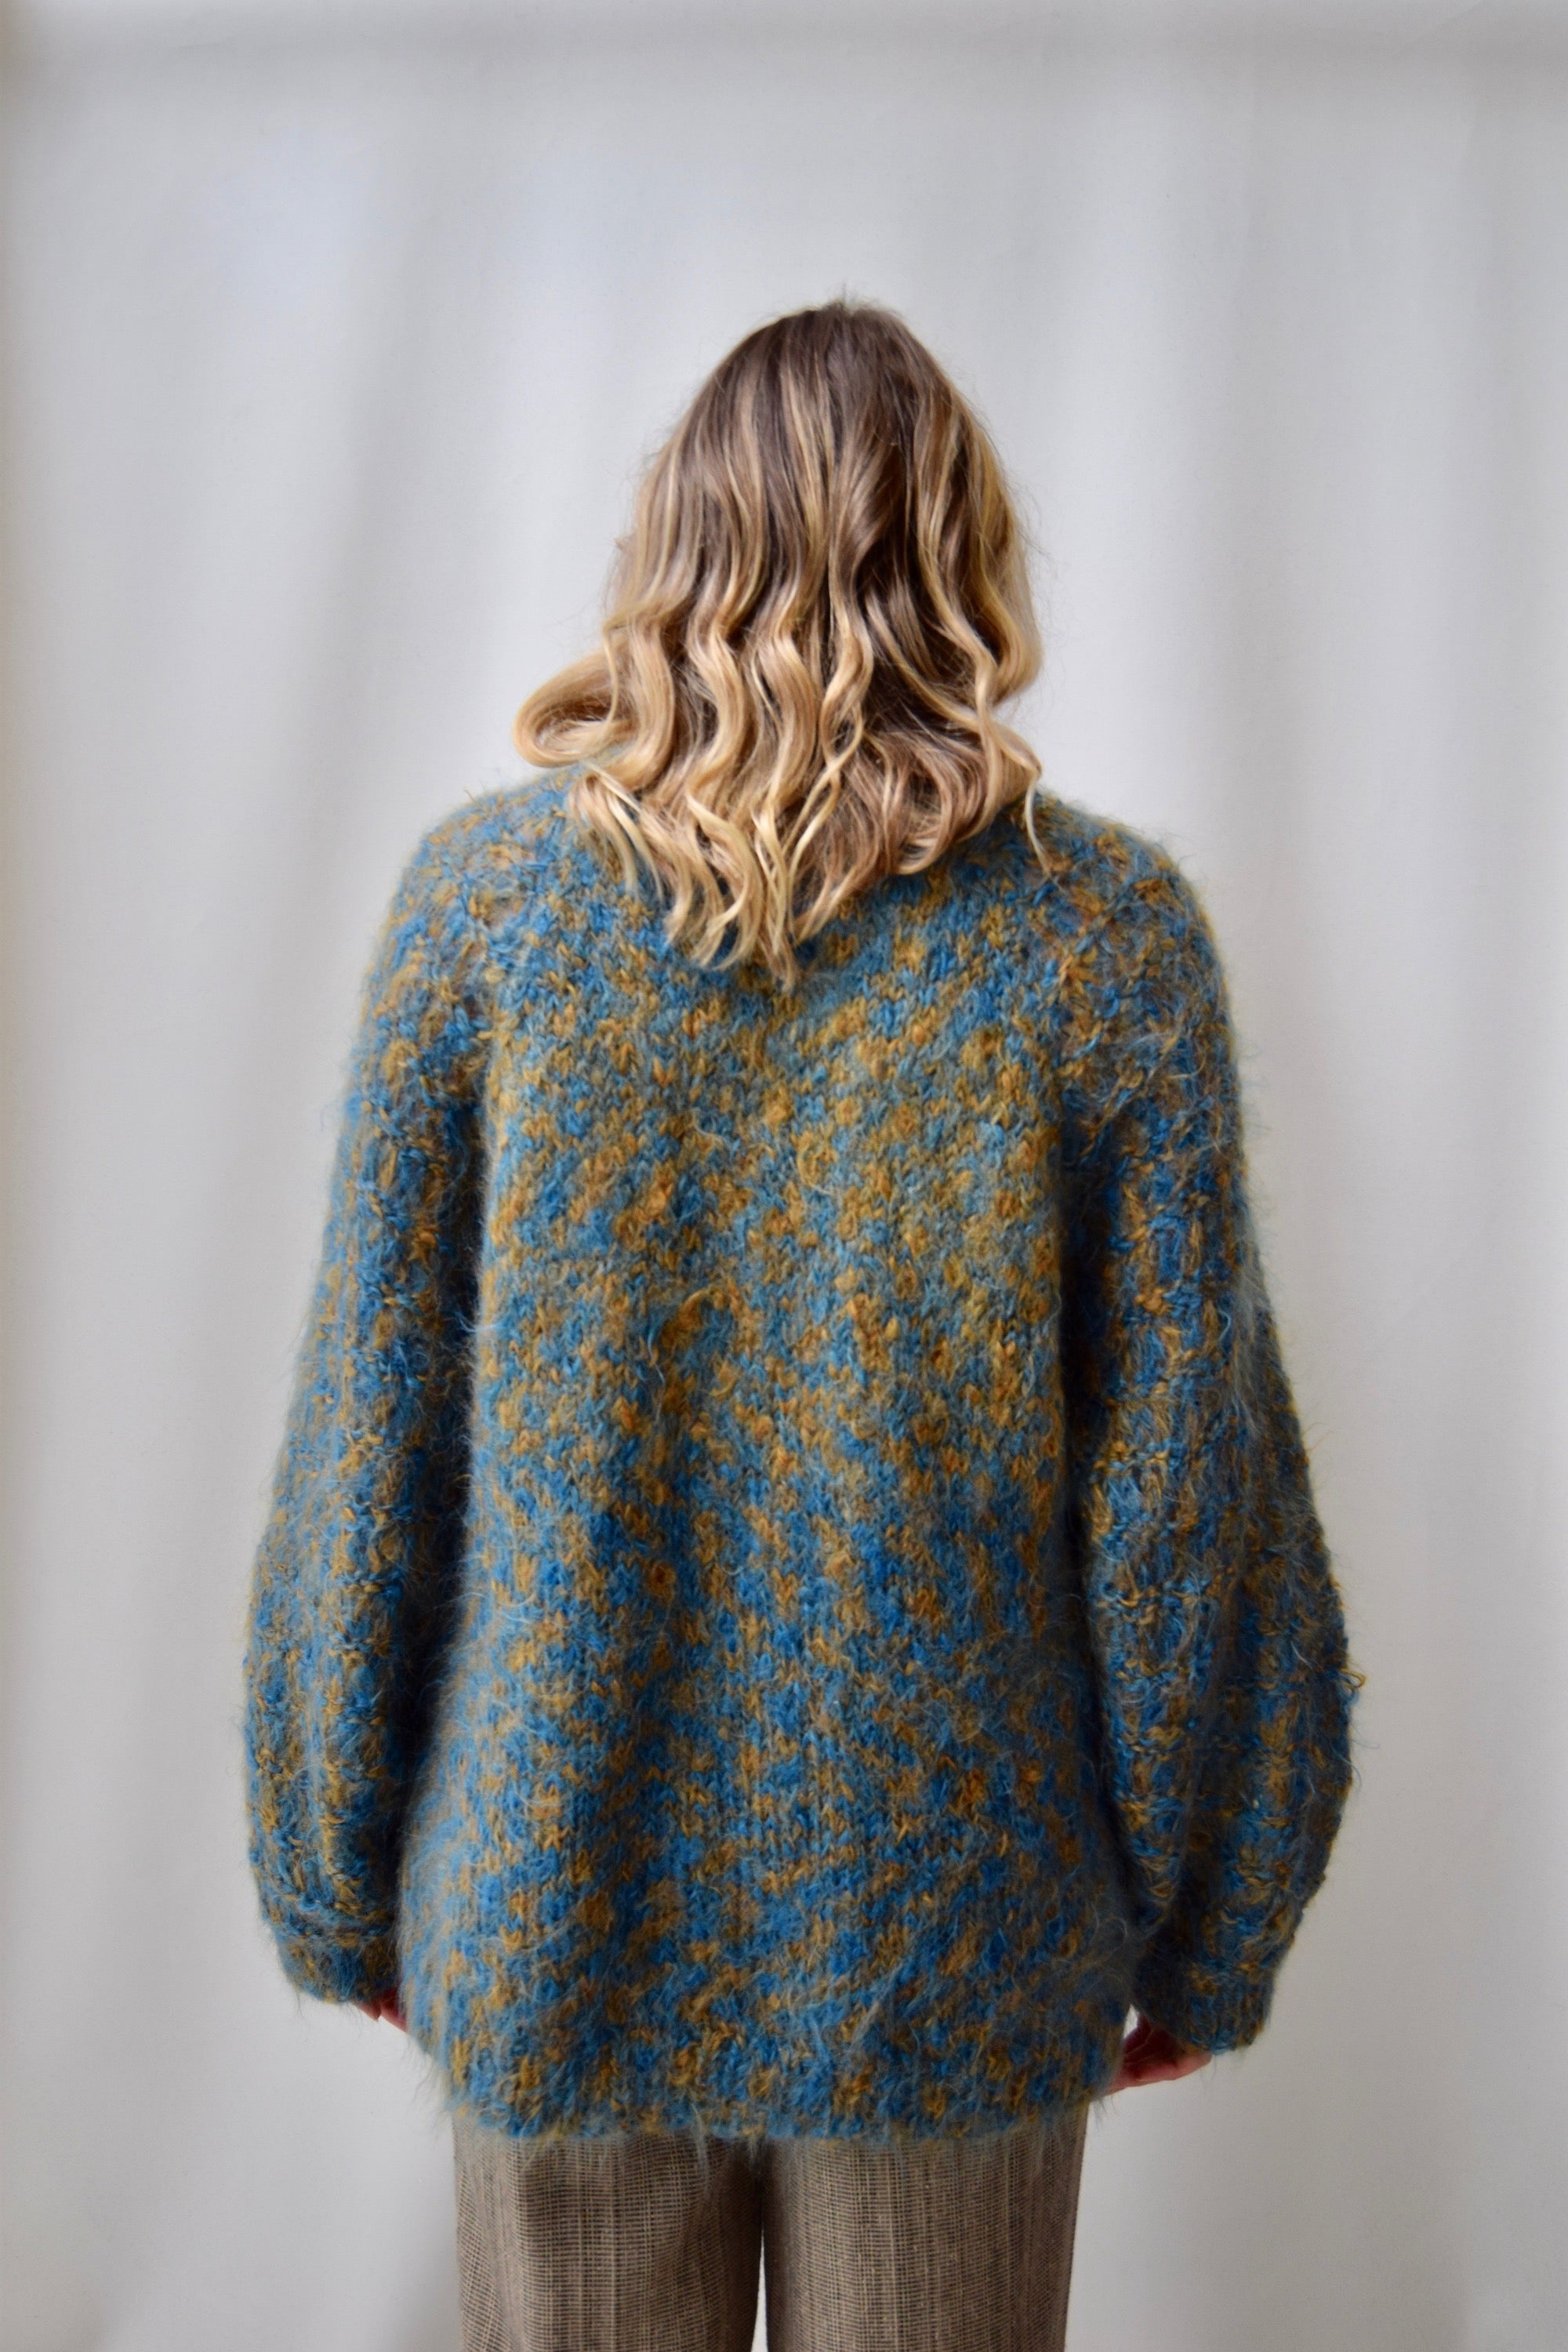 The Most Amazing Mohair Sweater